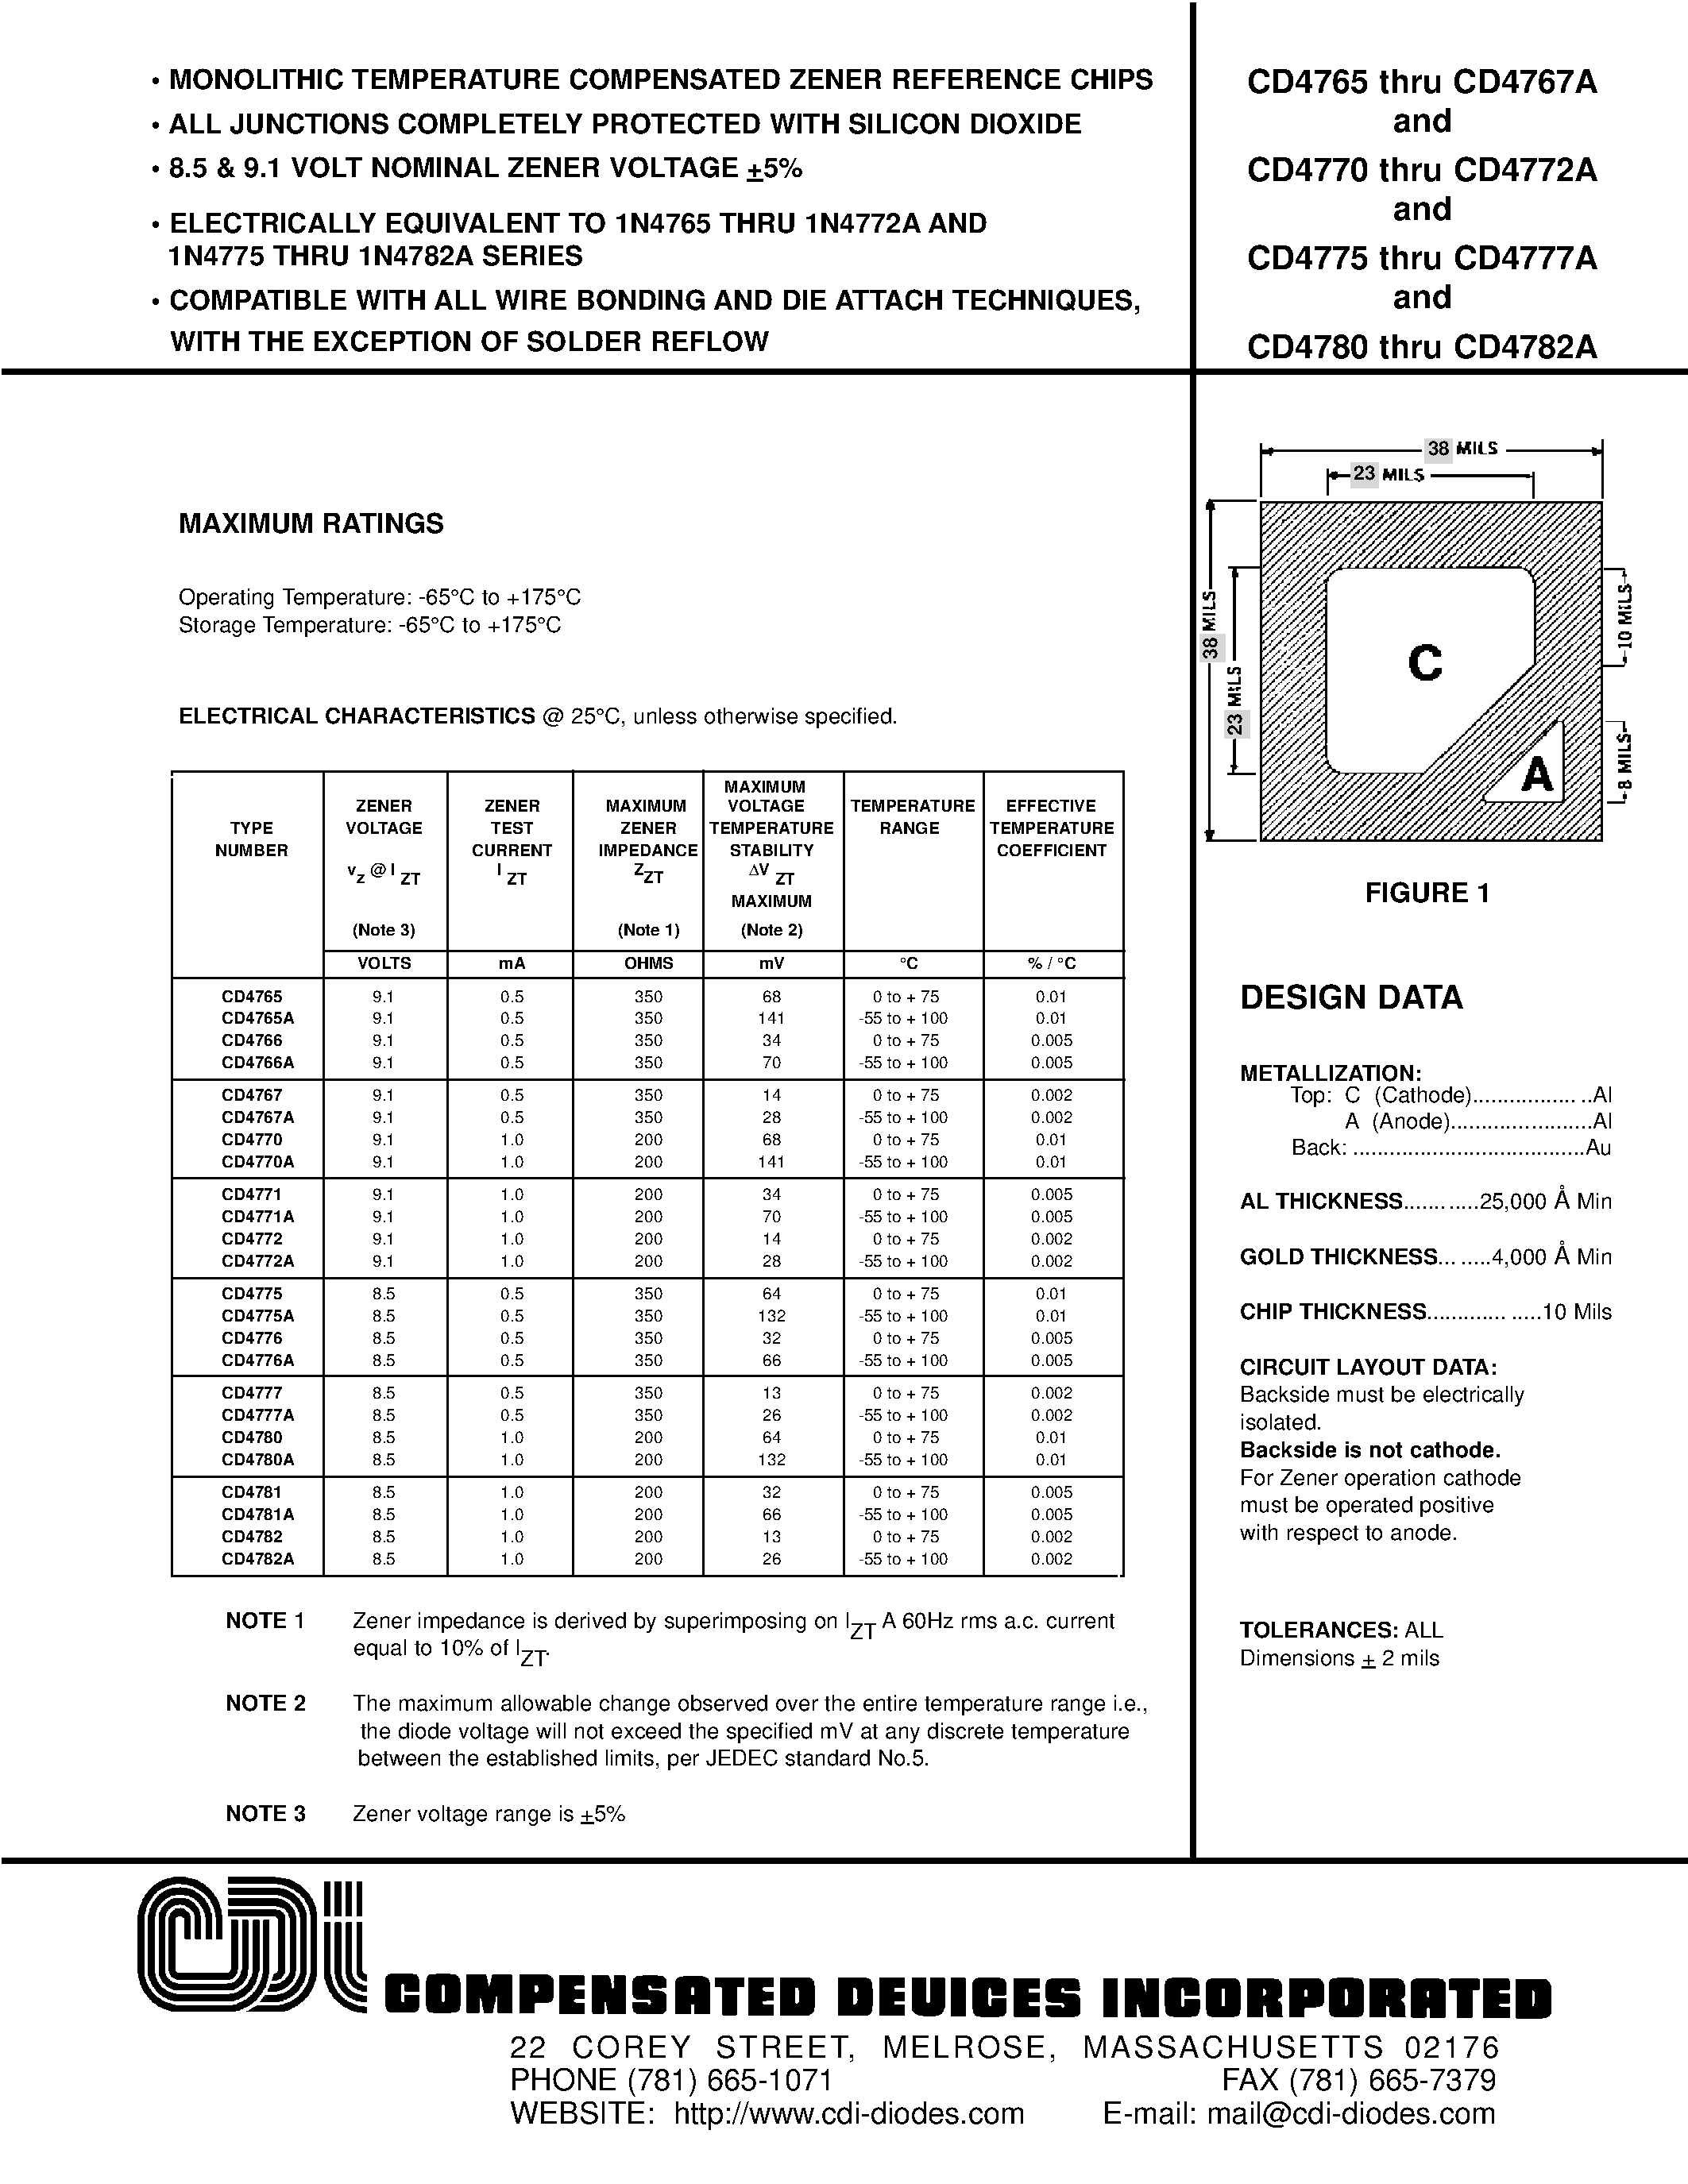 Datasheet CD4766A - MONOLITHIC TEMPERATURE COMPENSATED ZENER REFERENCE CHIPS page 1